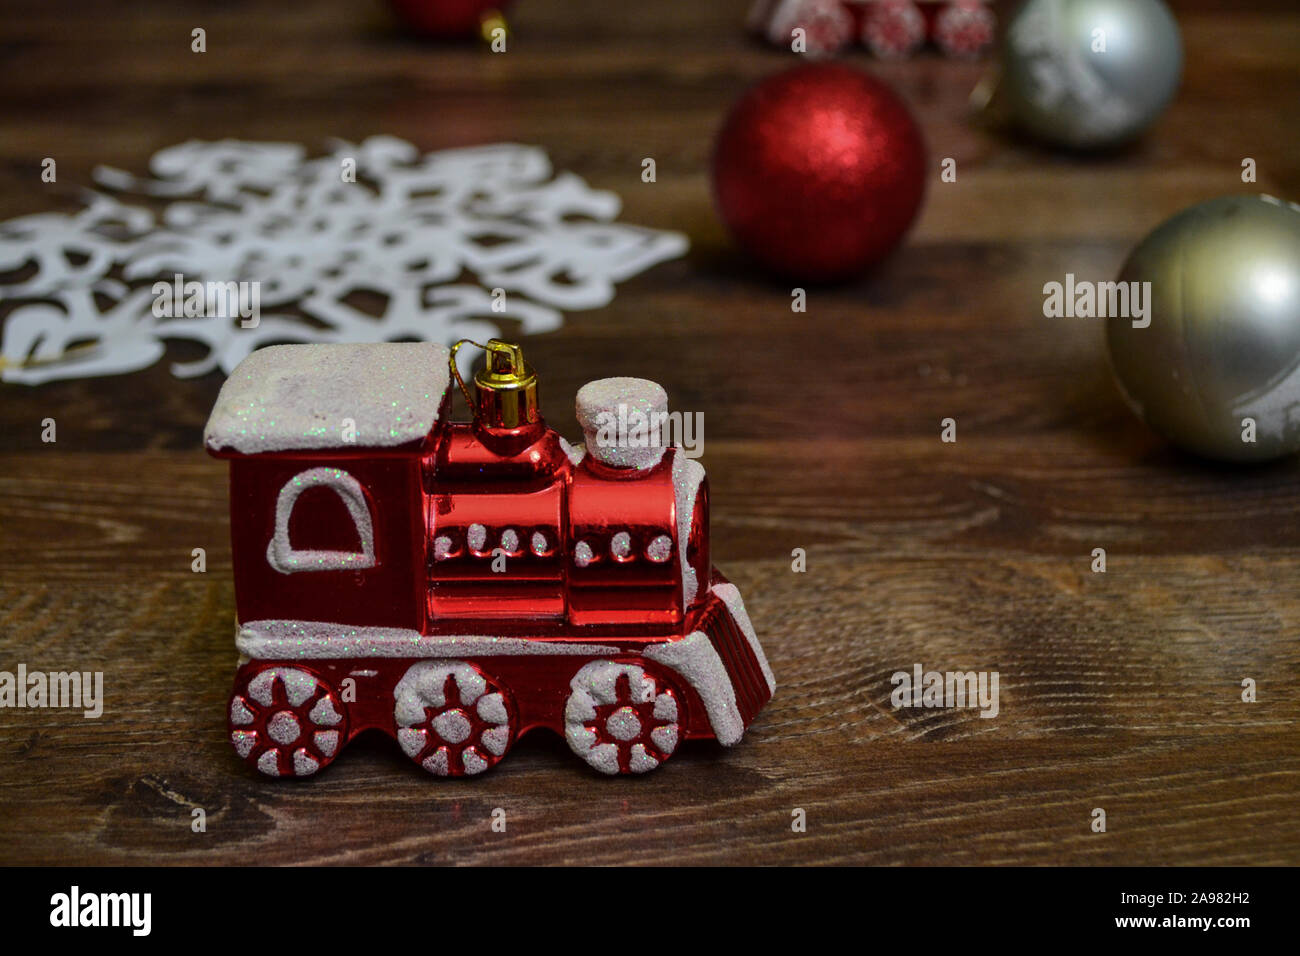 Red train and paper snow flake as Christmas ornaments decorations, photo-illustration Stock Photo